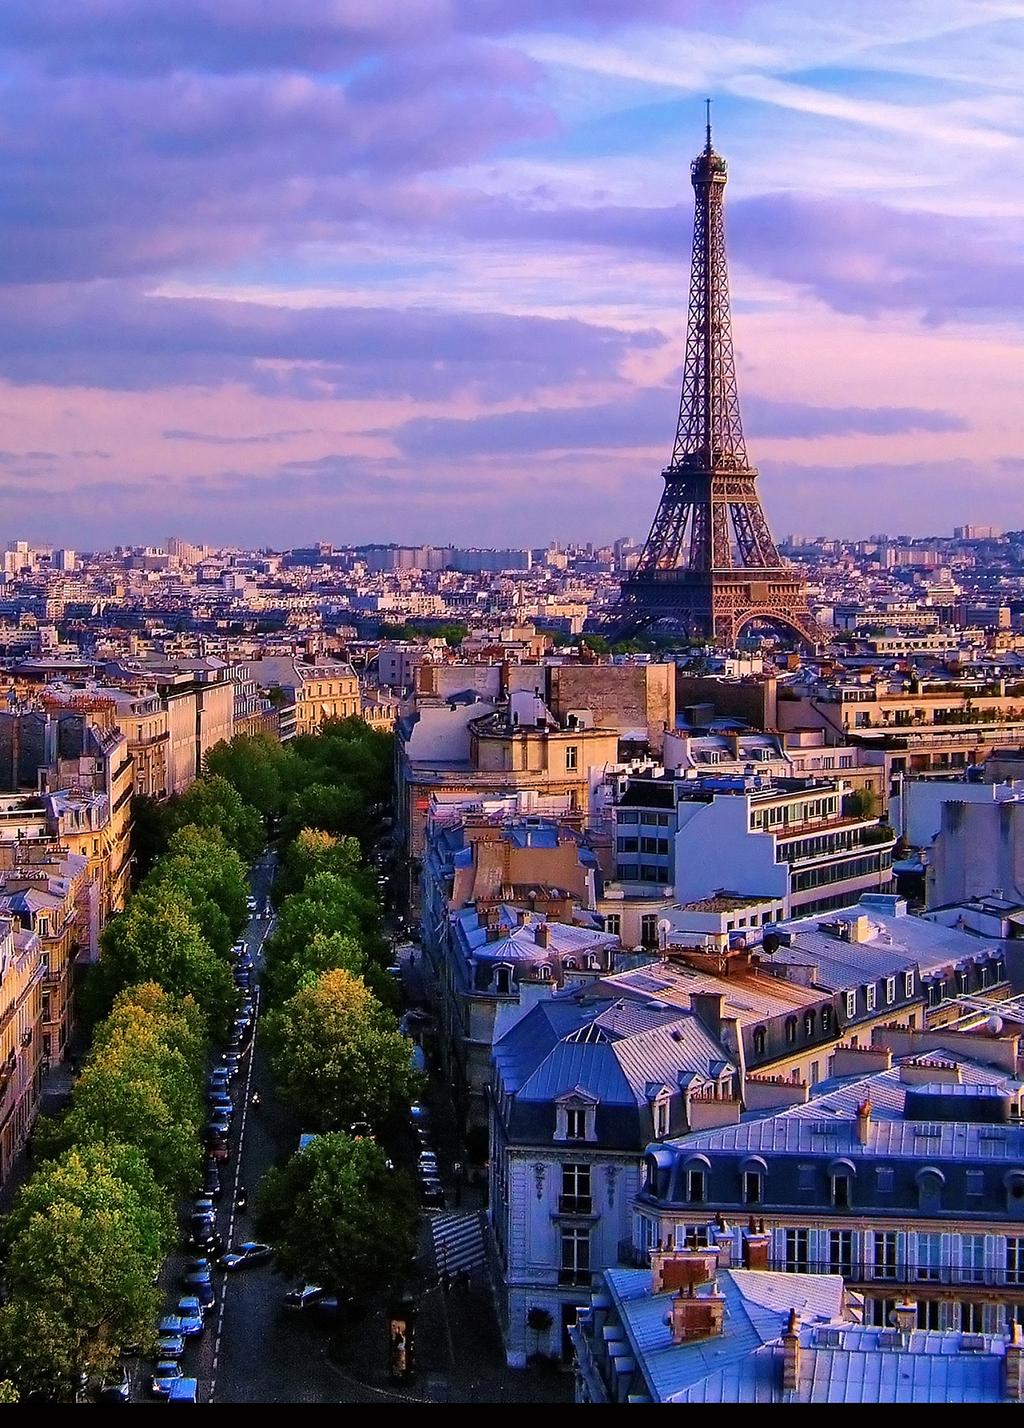 PARIS, FRANCE Paris has a timeless familiarity for first time and frequent visitors, with instantly recognisable architectural icons, along with exquisite cuisine, chic boutiques and priceless